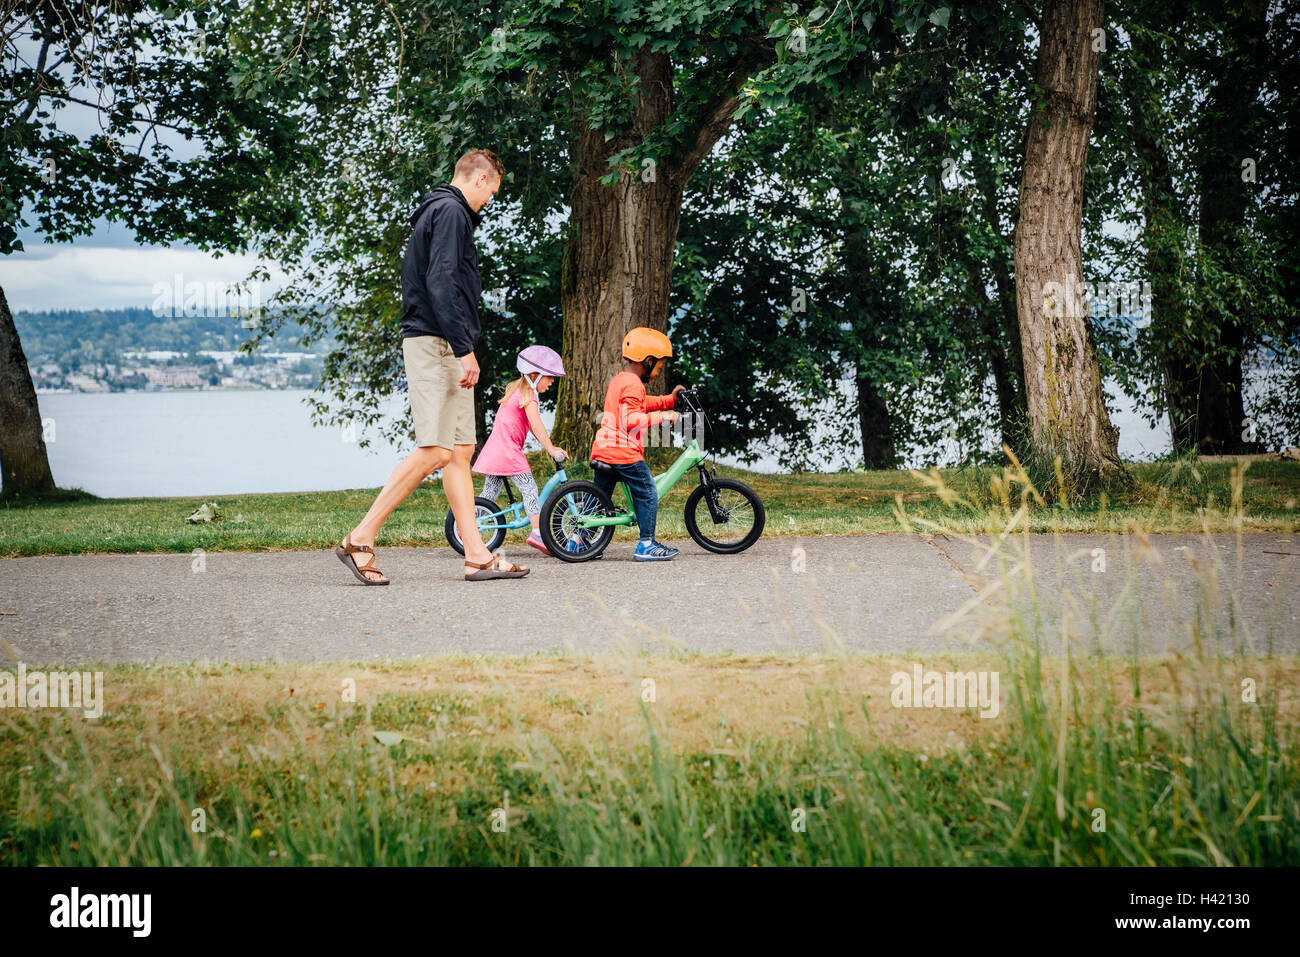 Father watching daughter and son riding bicycles Stock Photo